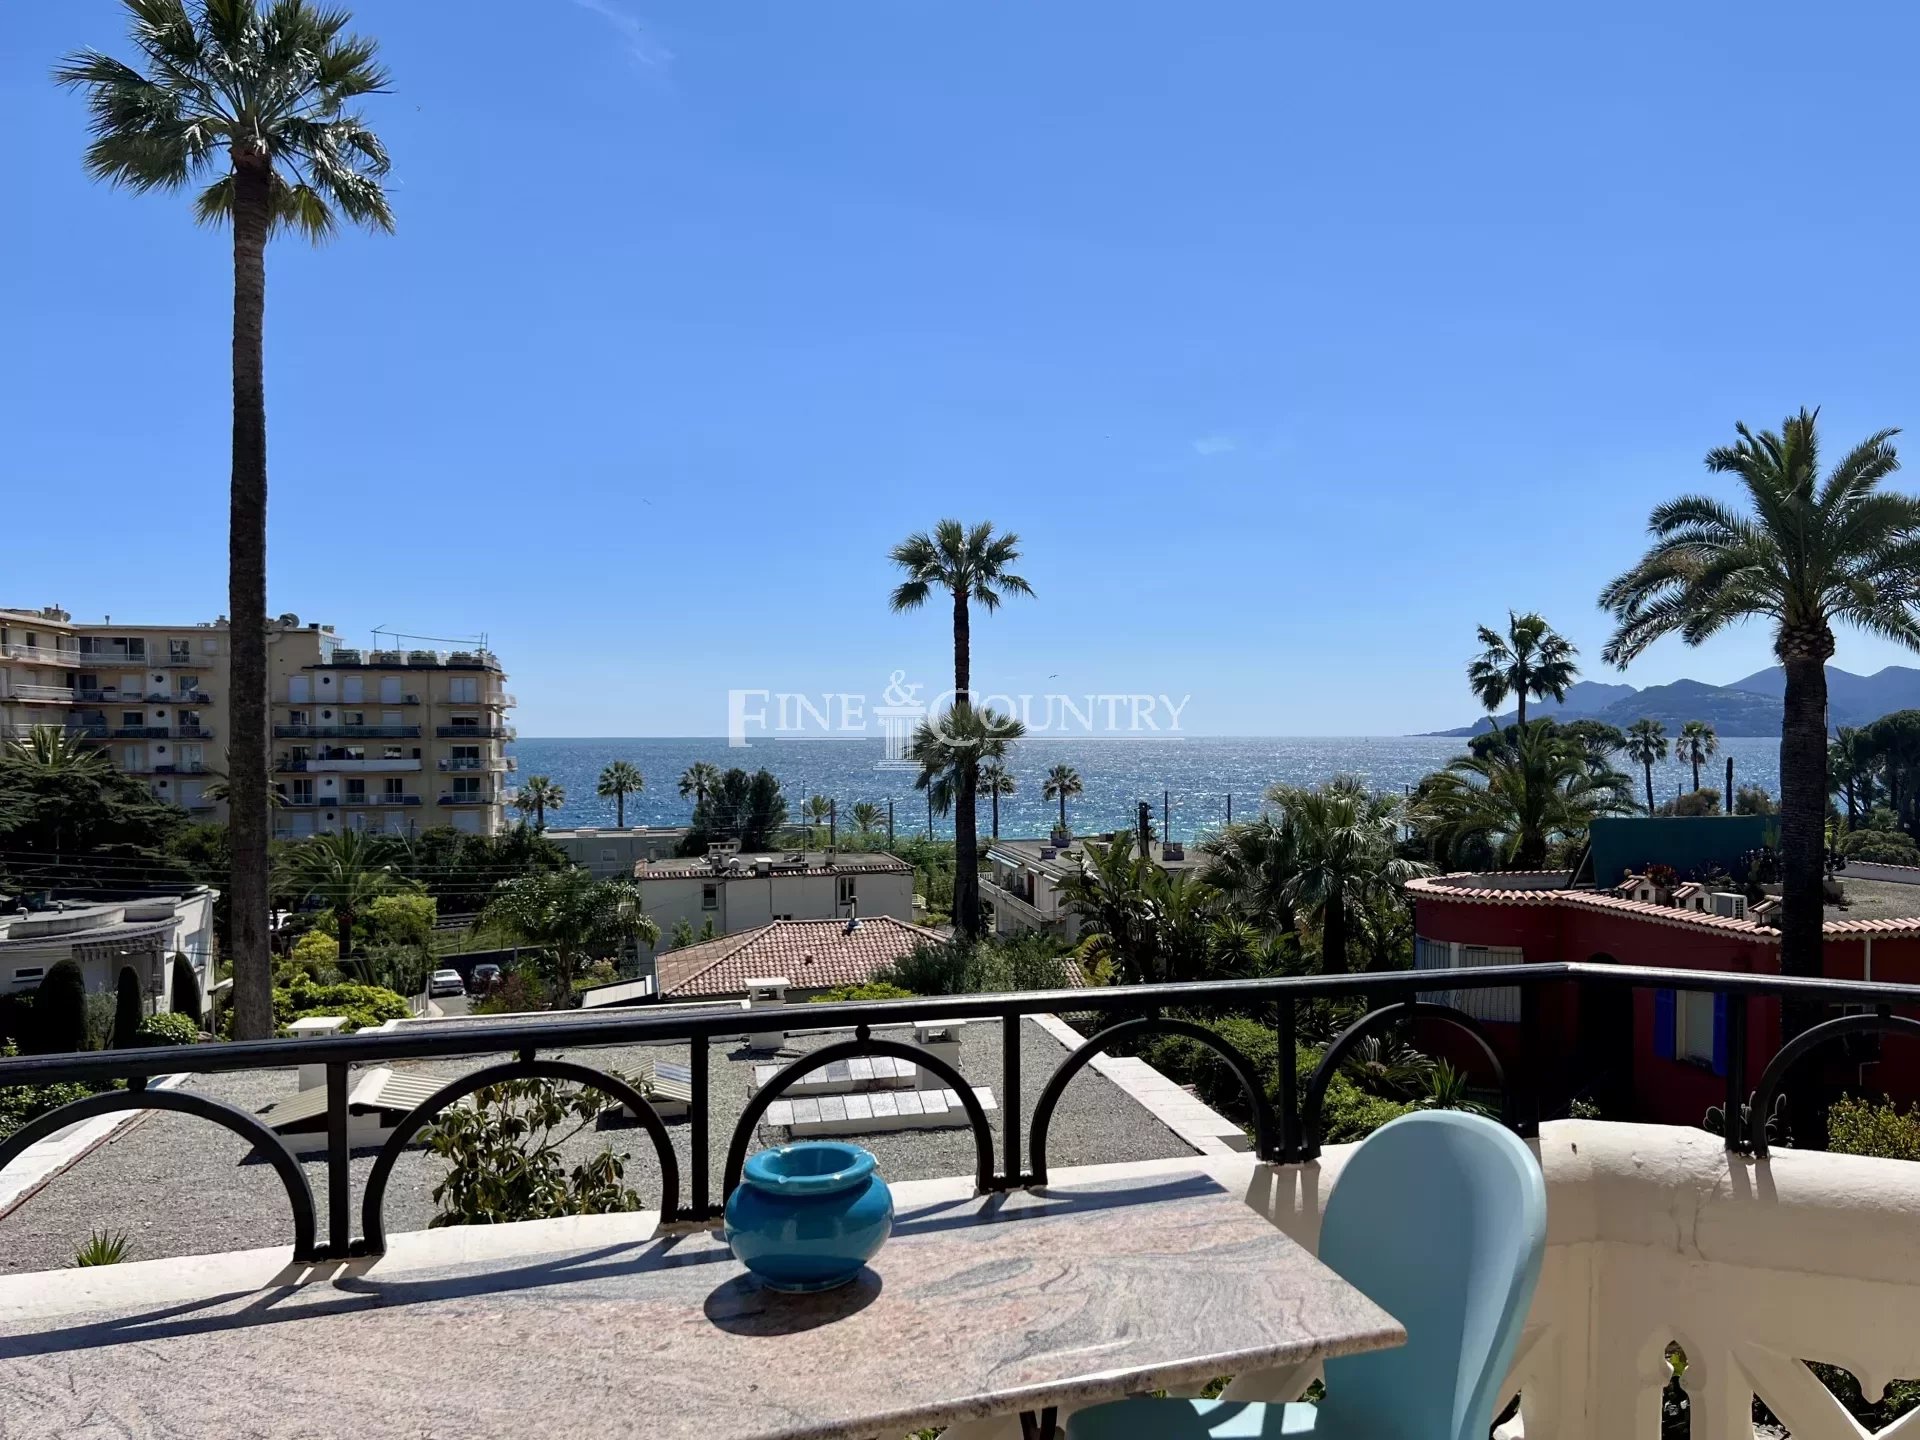 Vente Appartement Bourgeois Vue Mer Cannes